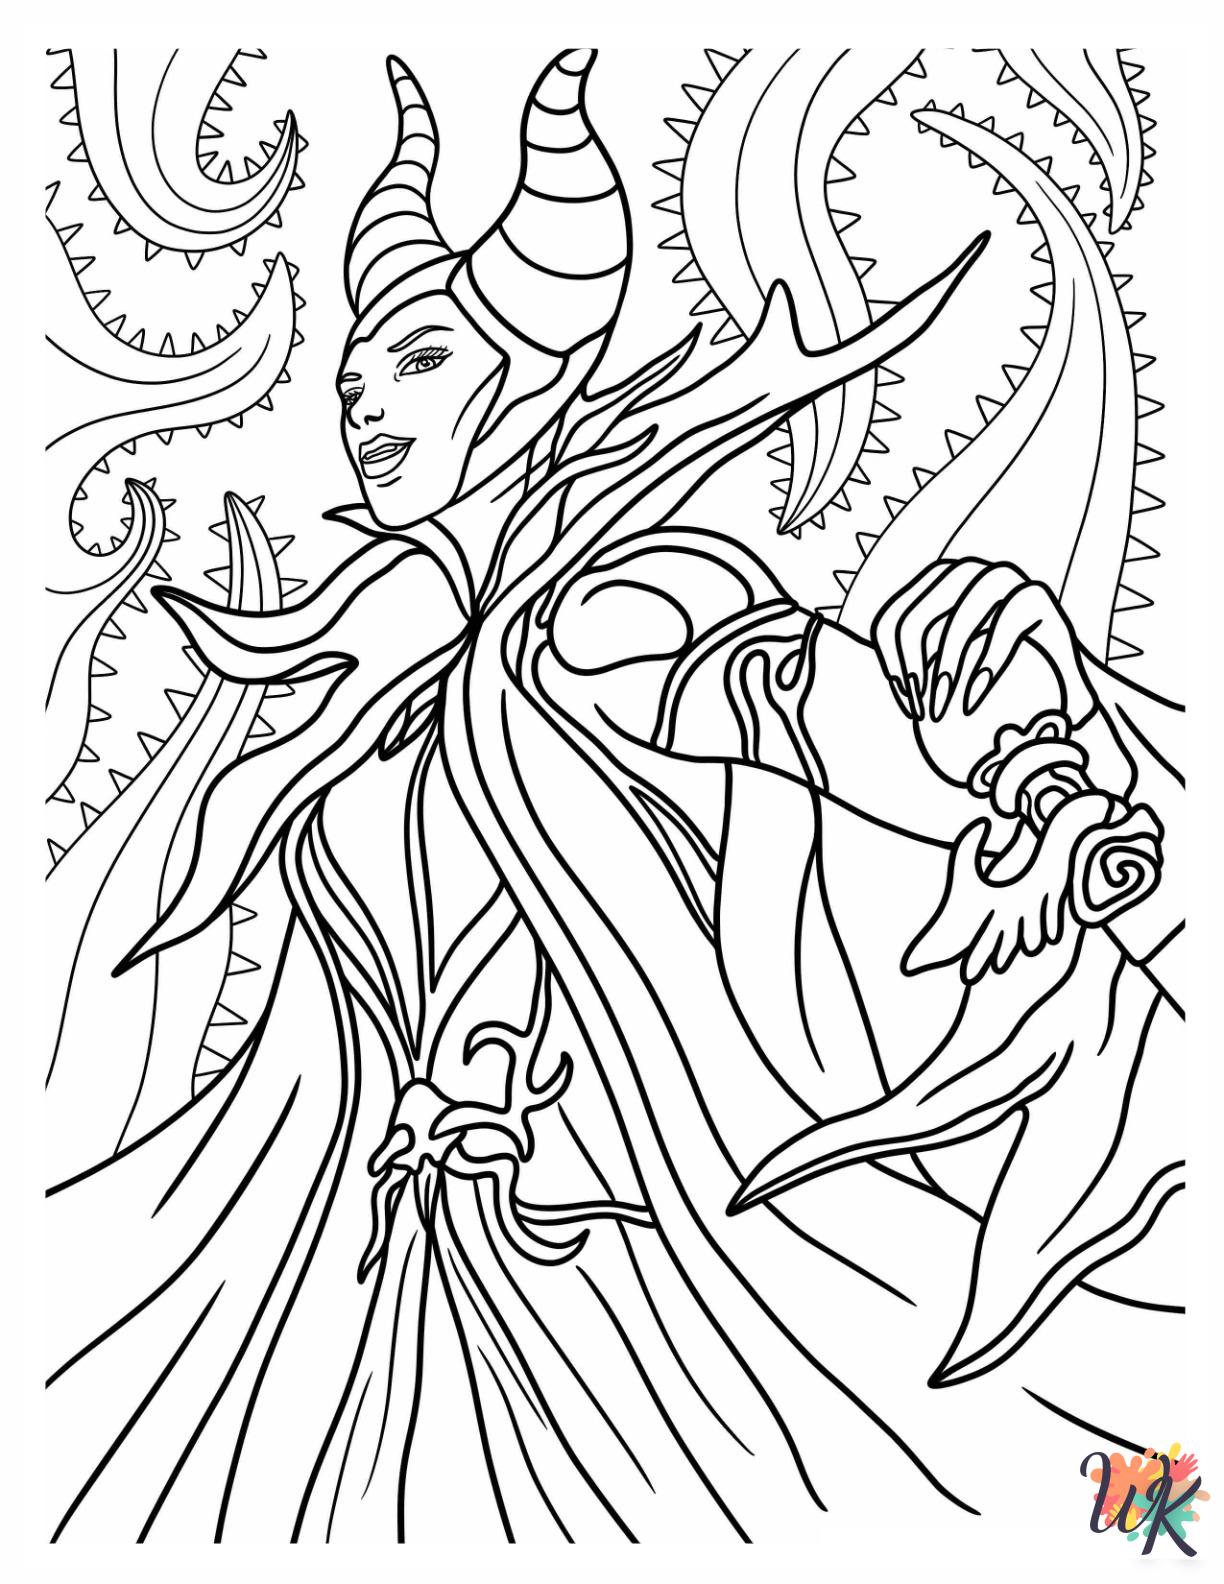 free full size printable Maleficent coloring pages for adults pdf